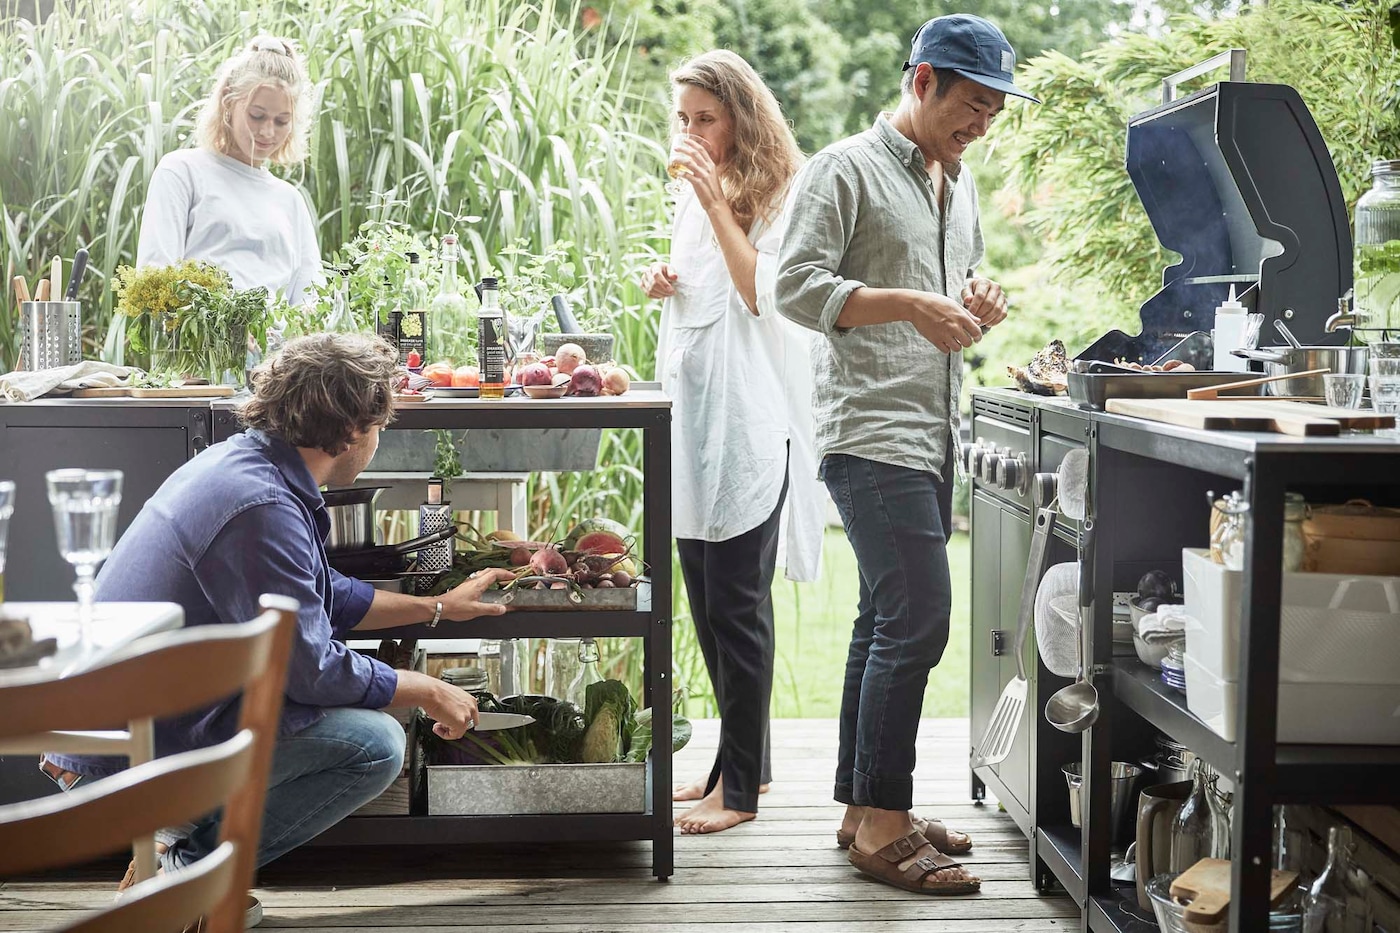 Four people grilling in an outdoor setting. There is a shelving unit with food ingredients and preparation items and a barbeque.